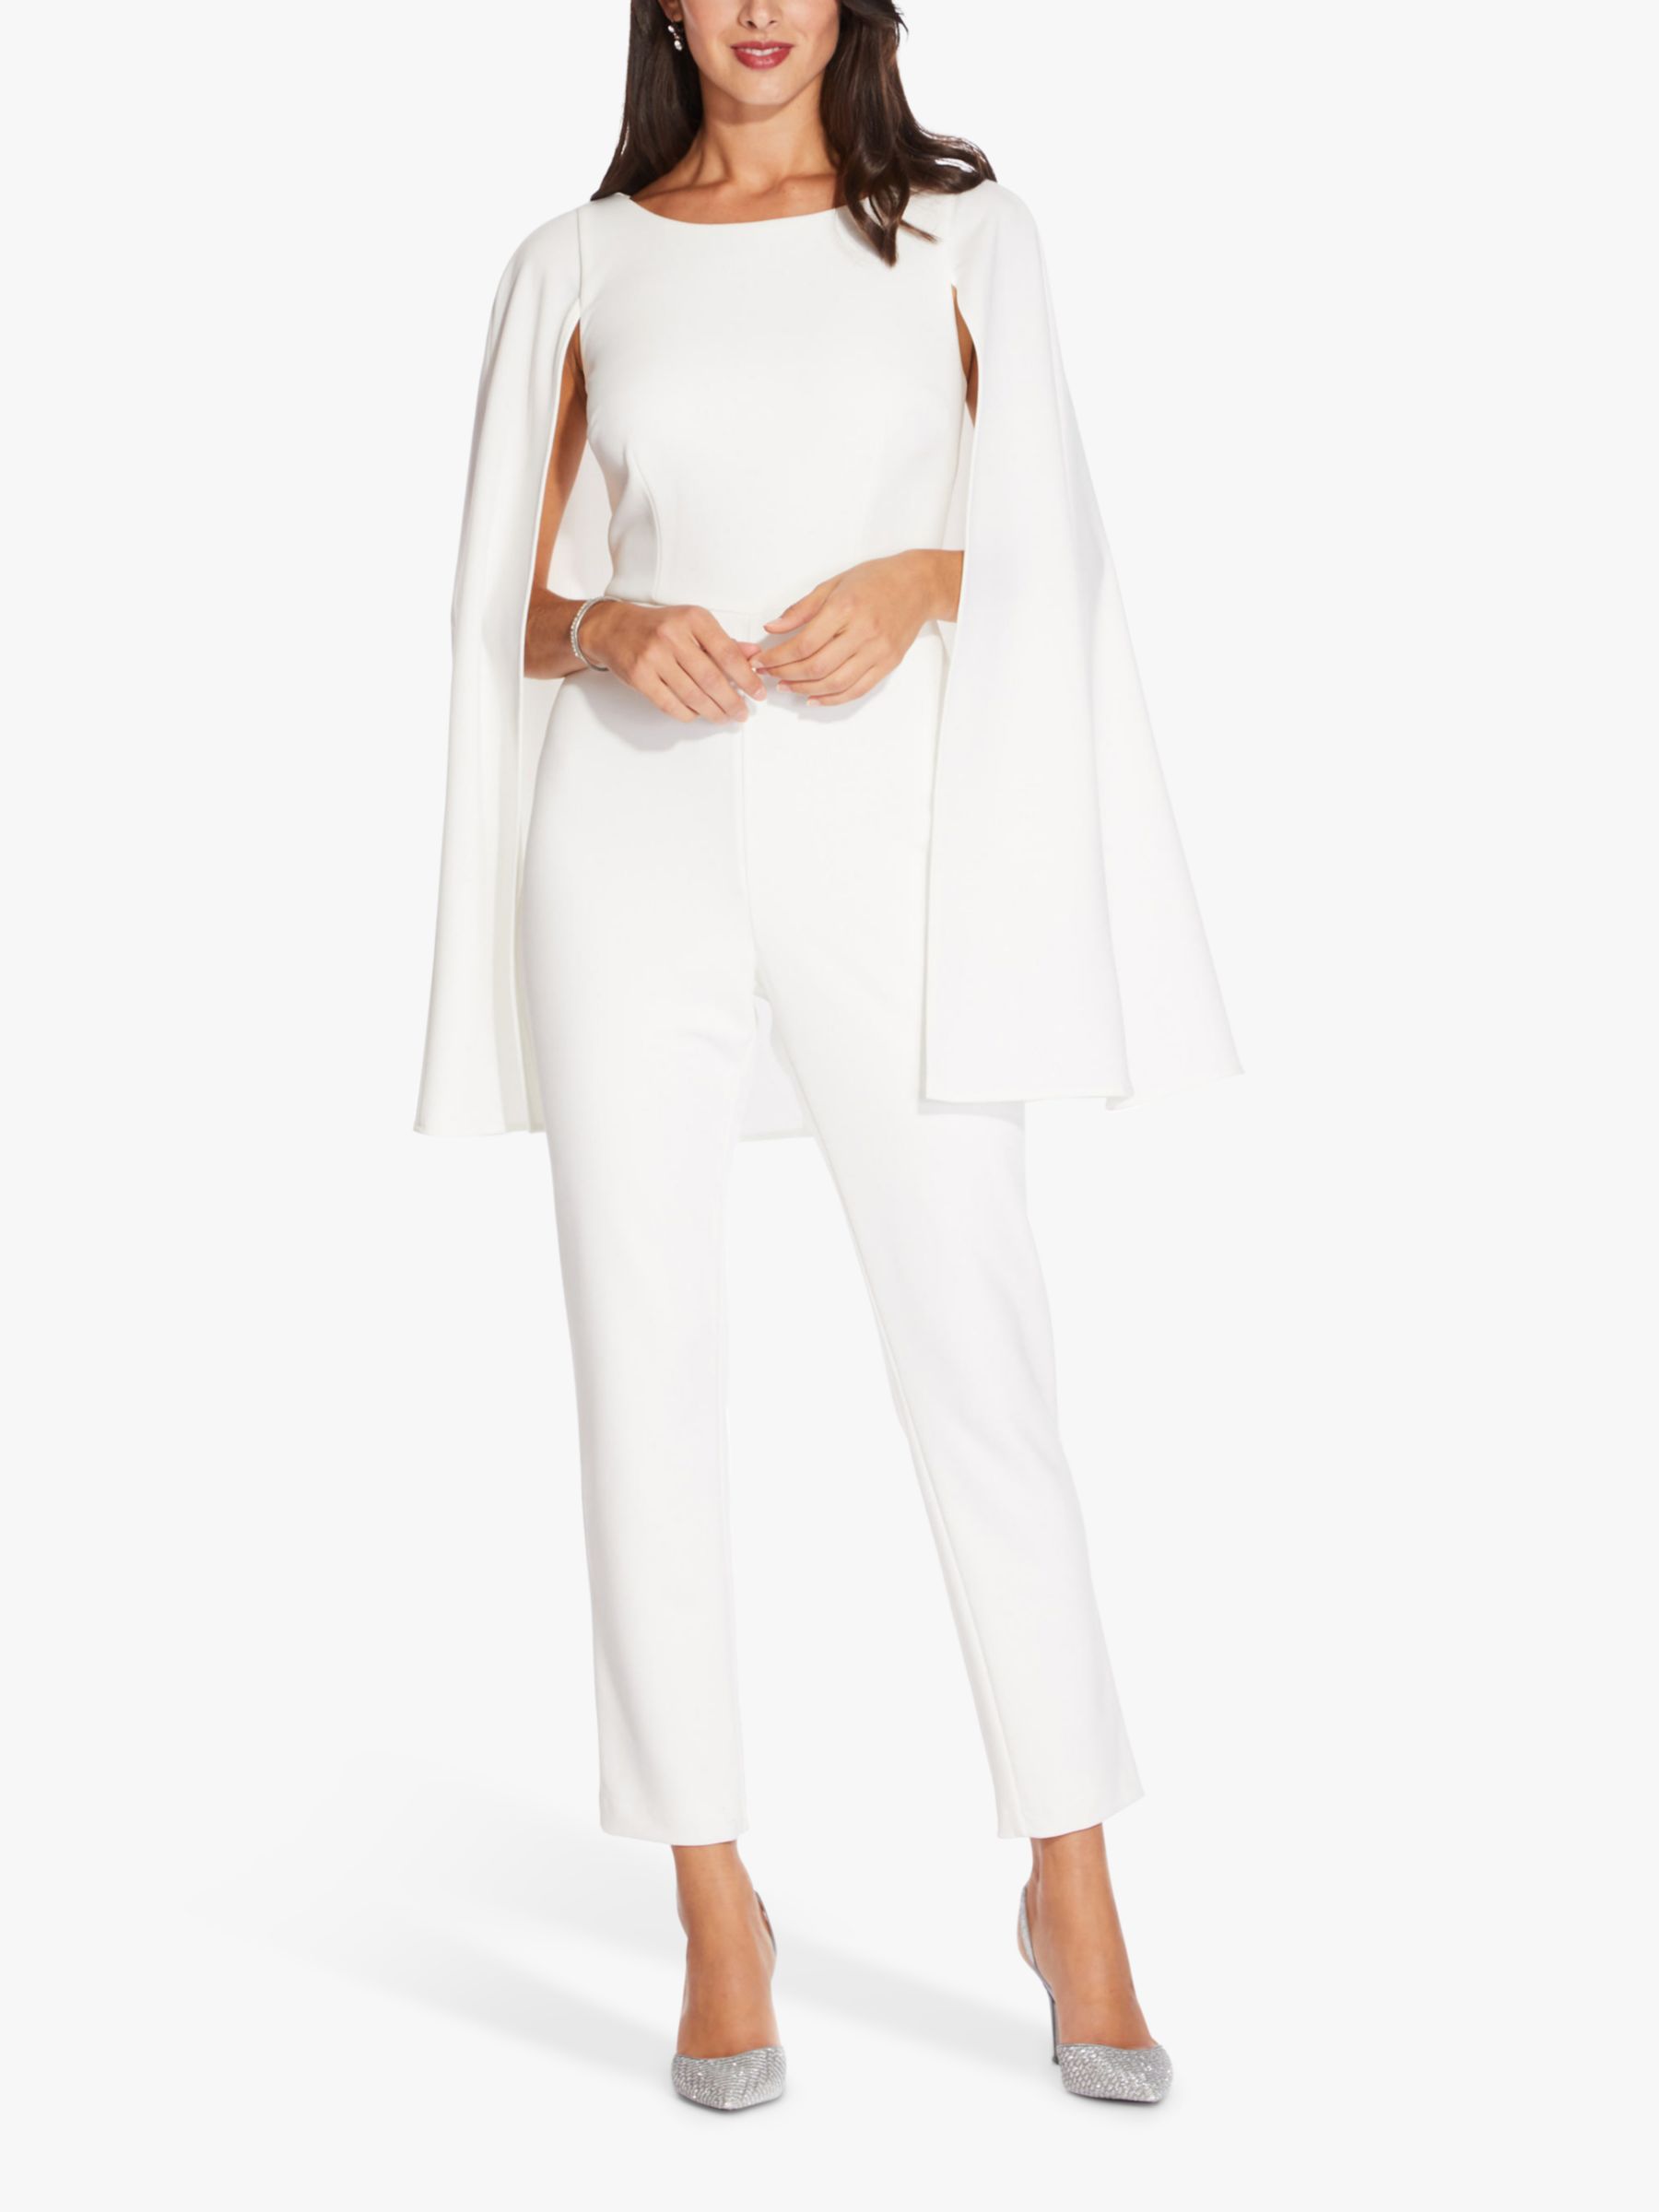 Adrianna Papell Knit Crepe Cape Jumpsuit, Ivory at John Lewis & Partners